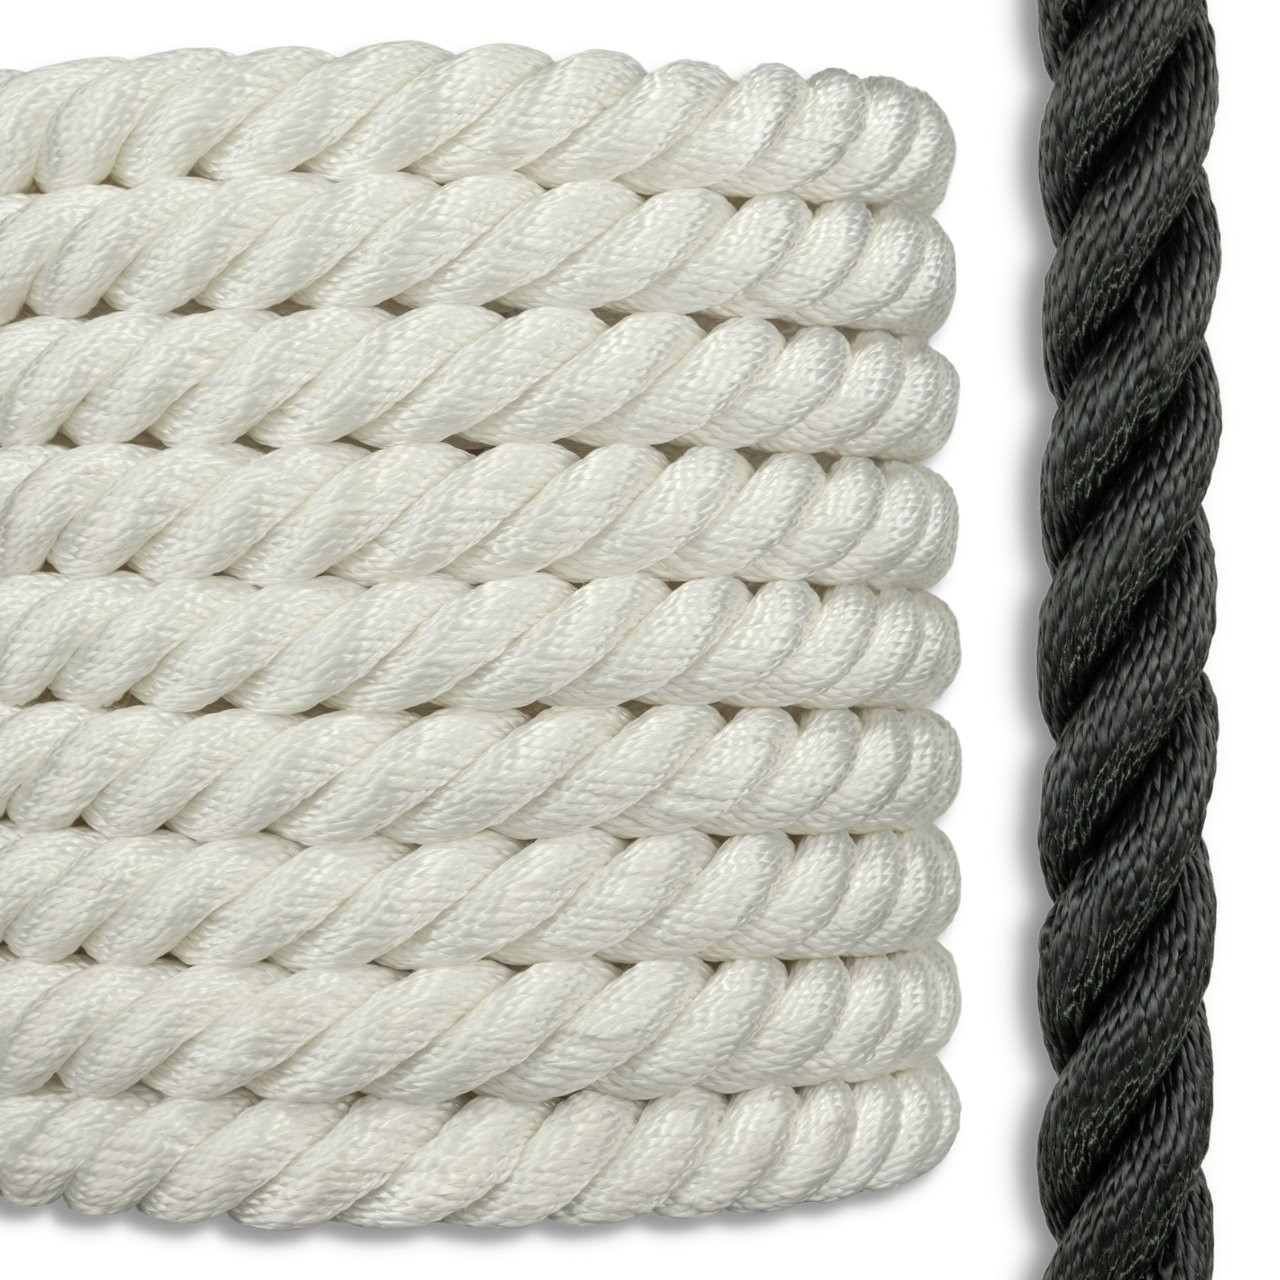 Non-Stretch, Solid and Durable kevlar cord 